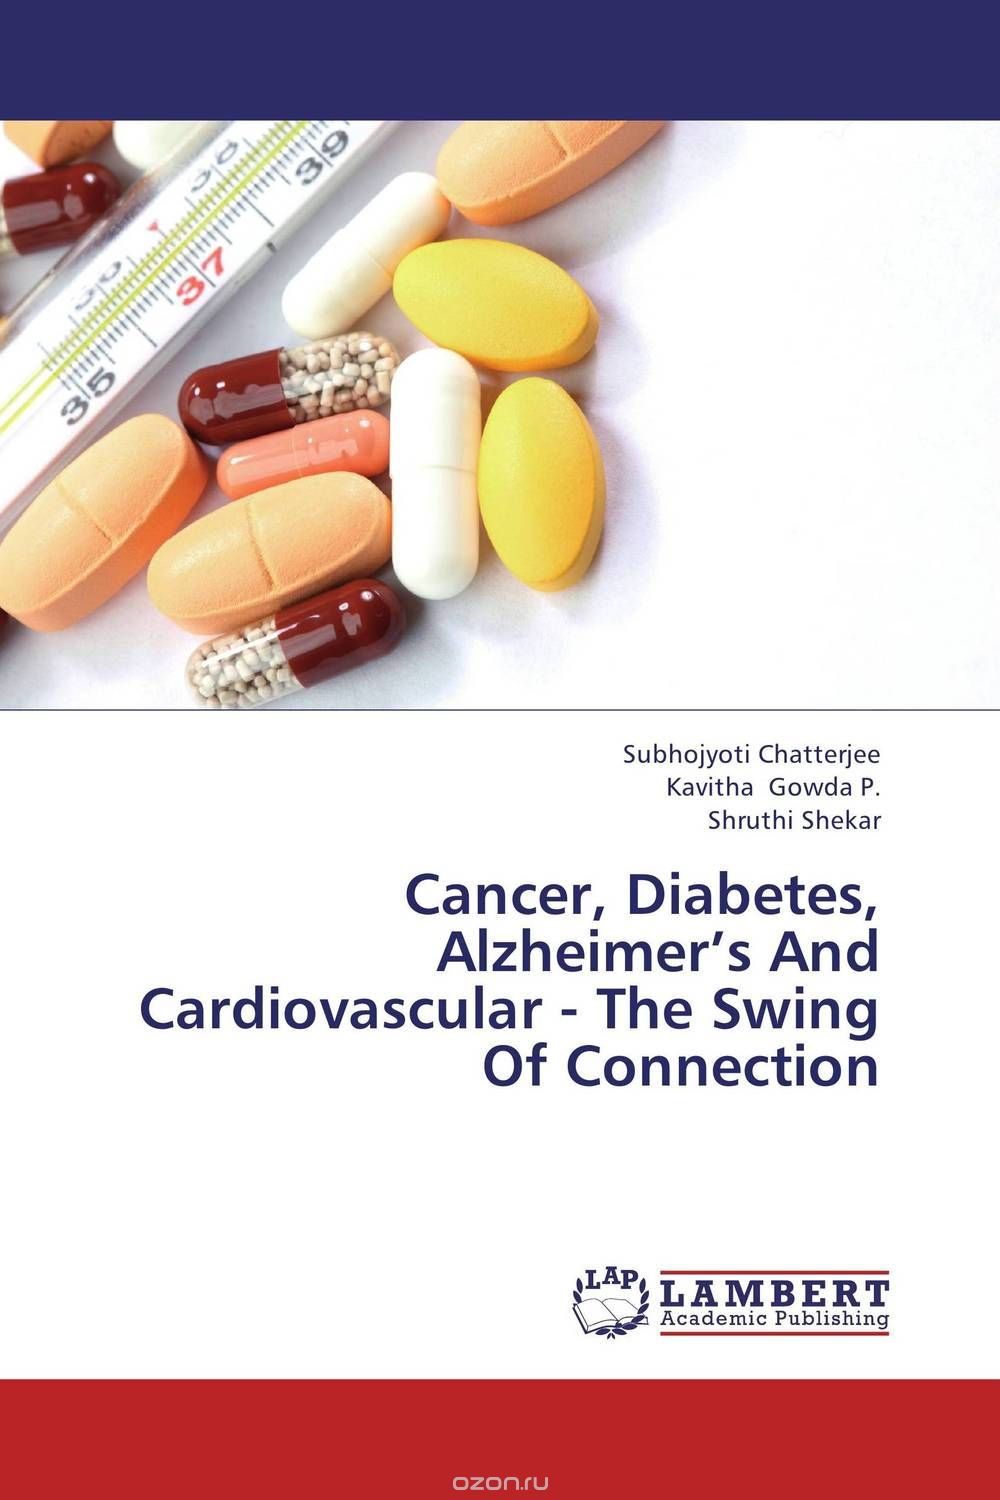 Скачать книгу "Cancer, Diabetes, Alzheimer’s And Cardiovascular - The Swing Of Connection"